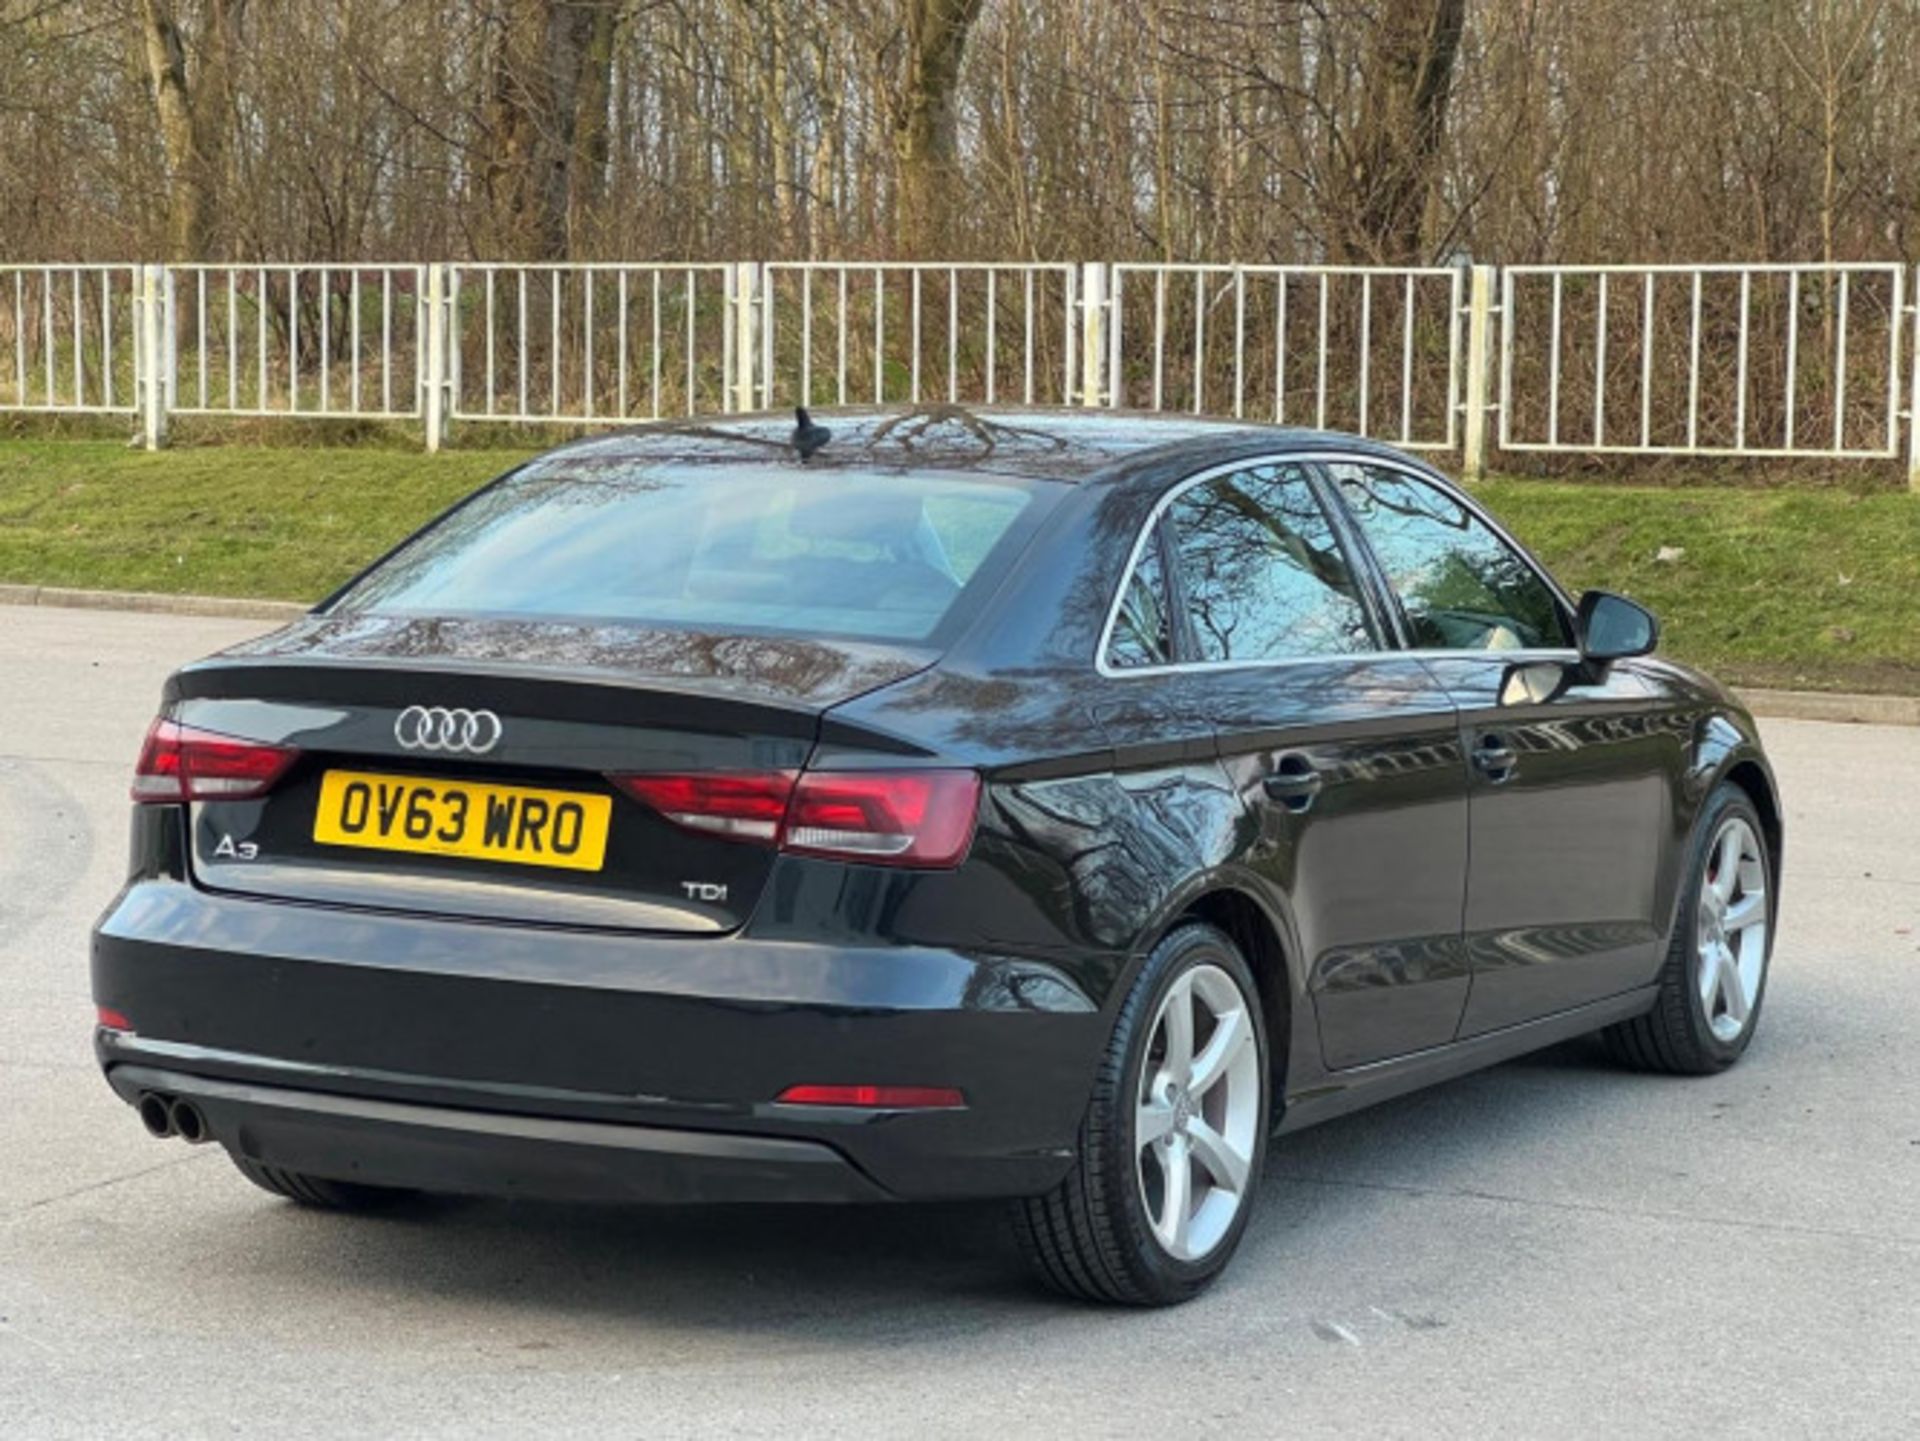 AUDI A3 2.0TDI SPORTBACK - STYLE, PERFORMANCE, AND COMFORT COMBINED >>--NO VAT ON HAMMER--<< - Image 211 of 216